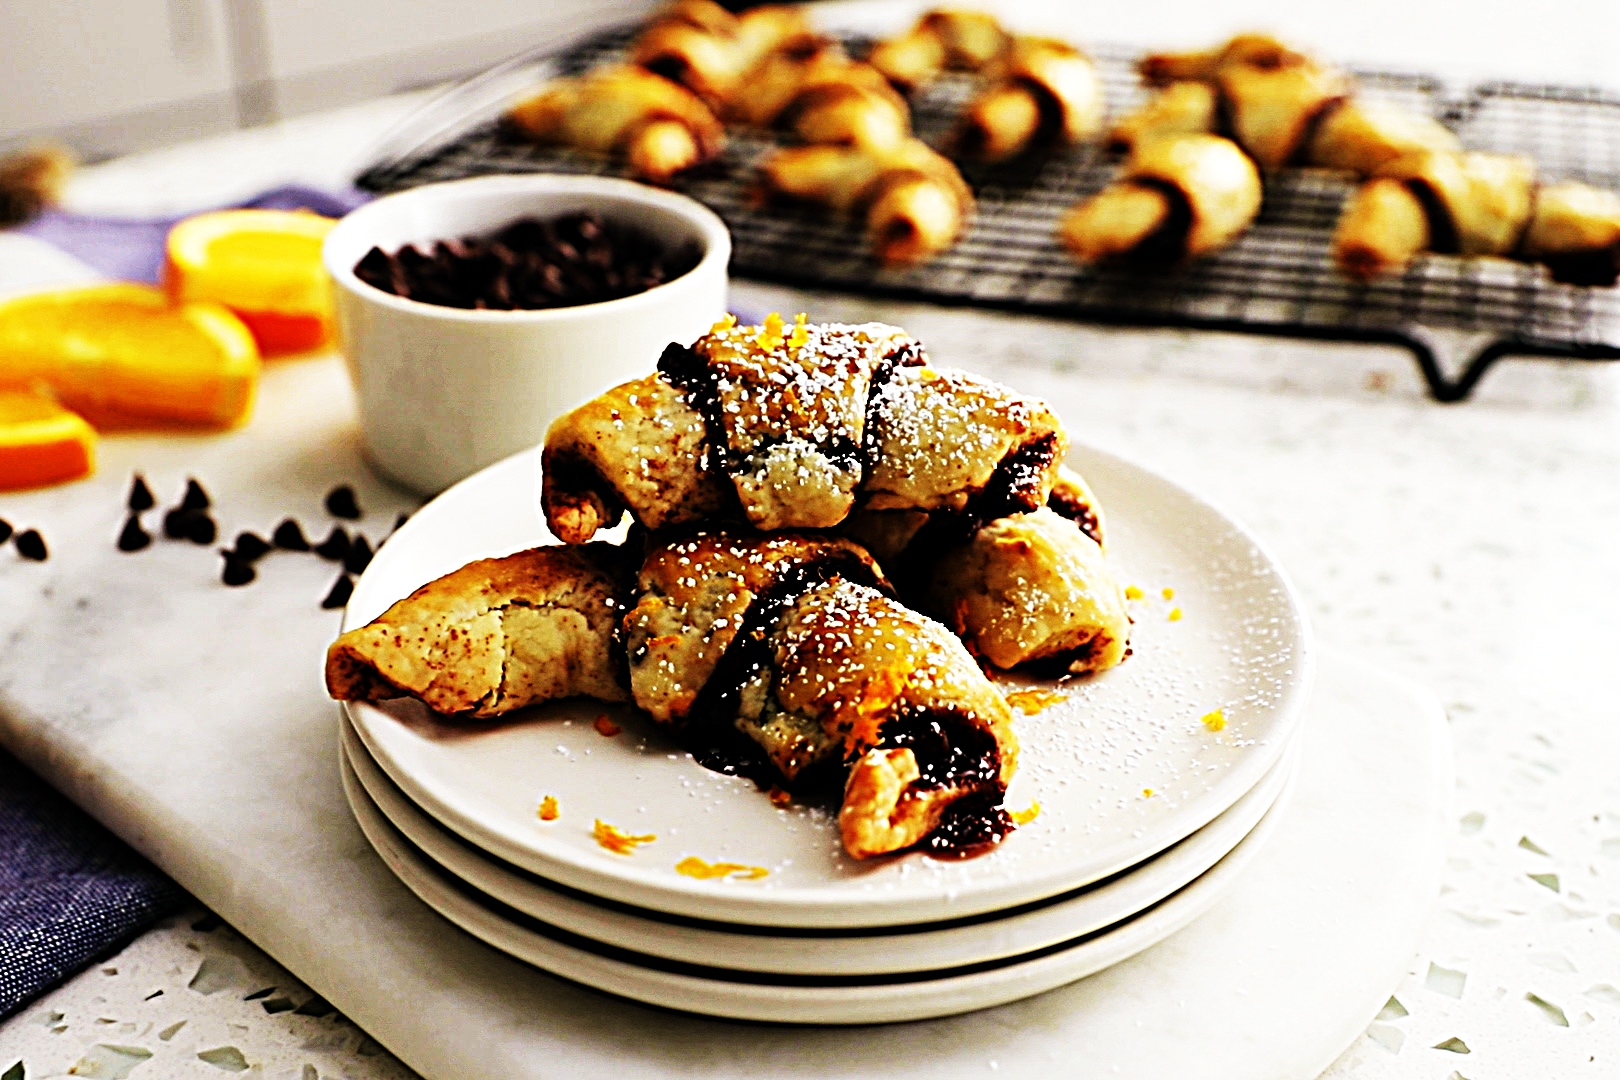 Stupid-Easy Recipe for Chocolate-Orange Rugelach (#1 Top-Rated)